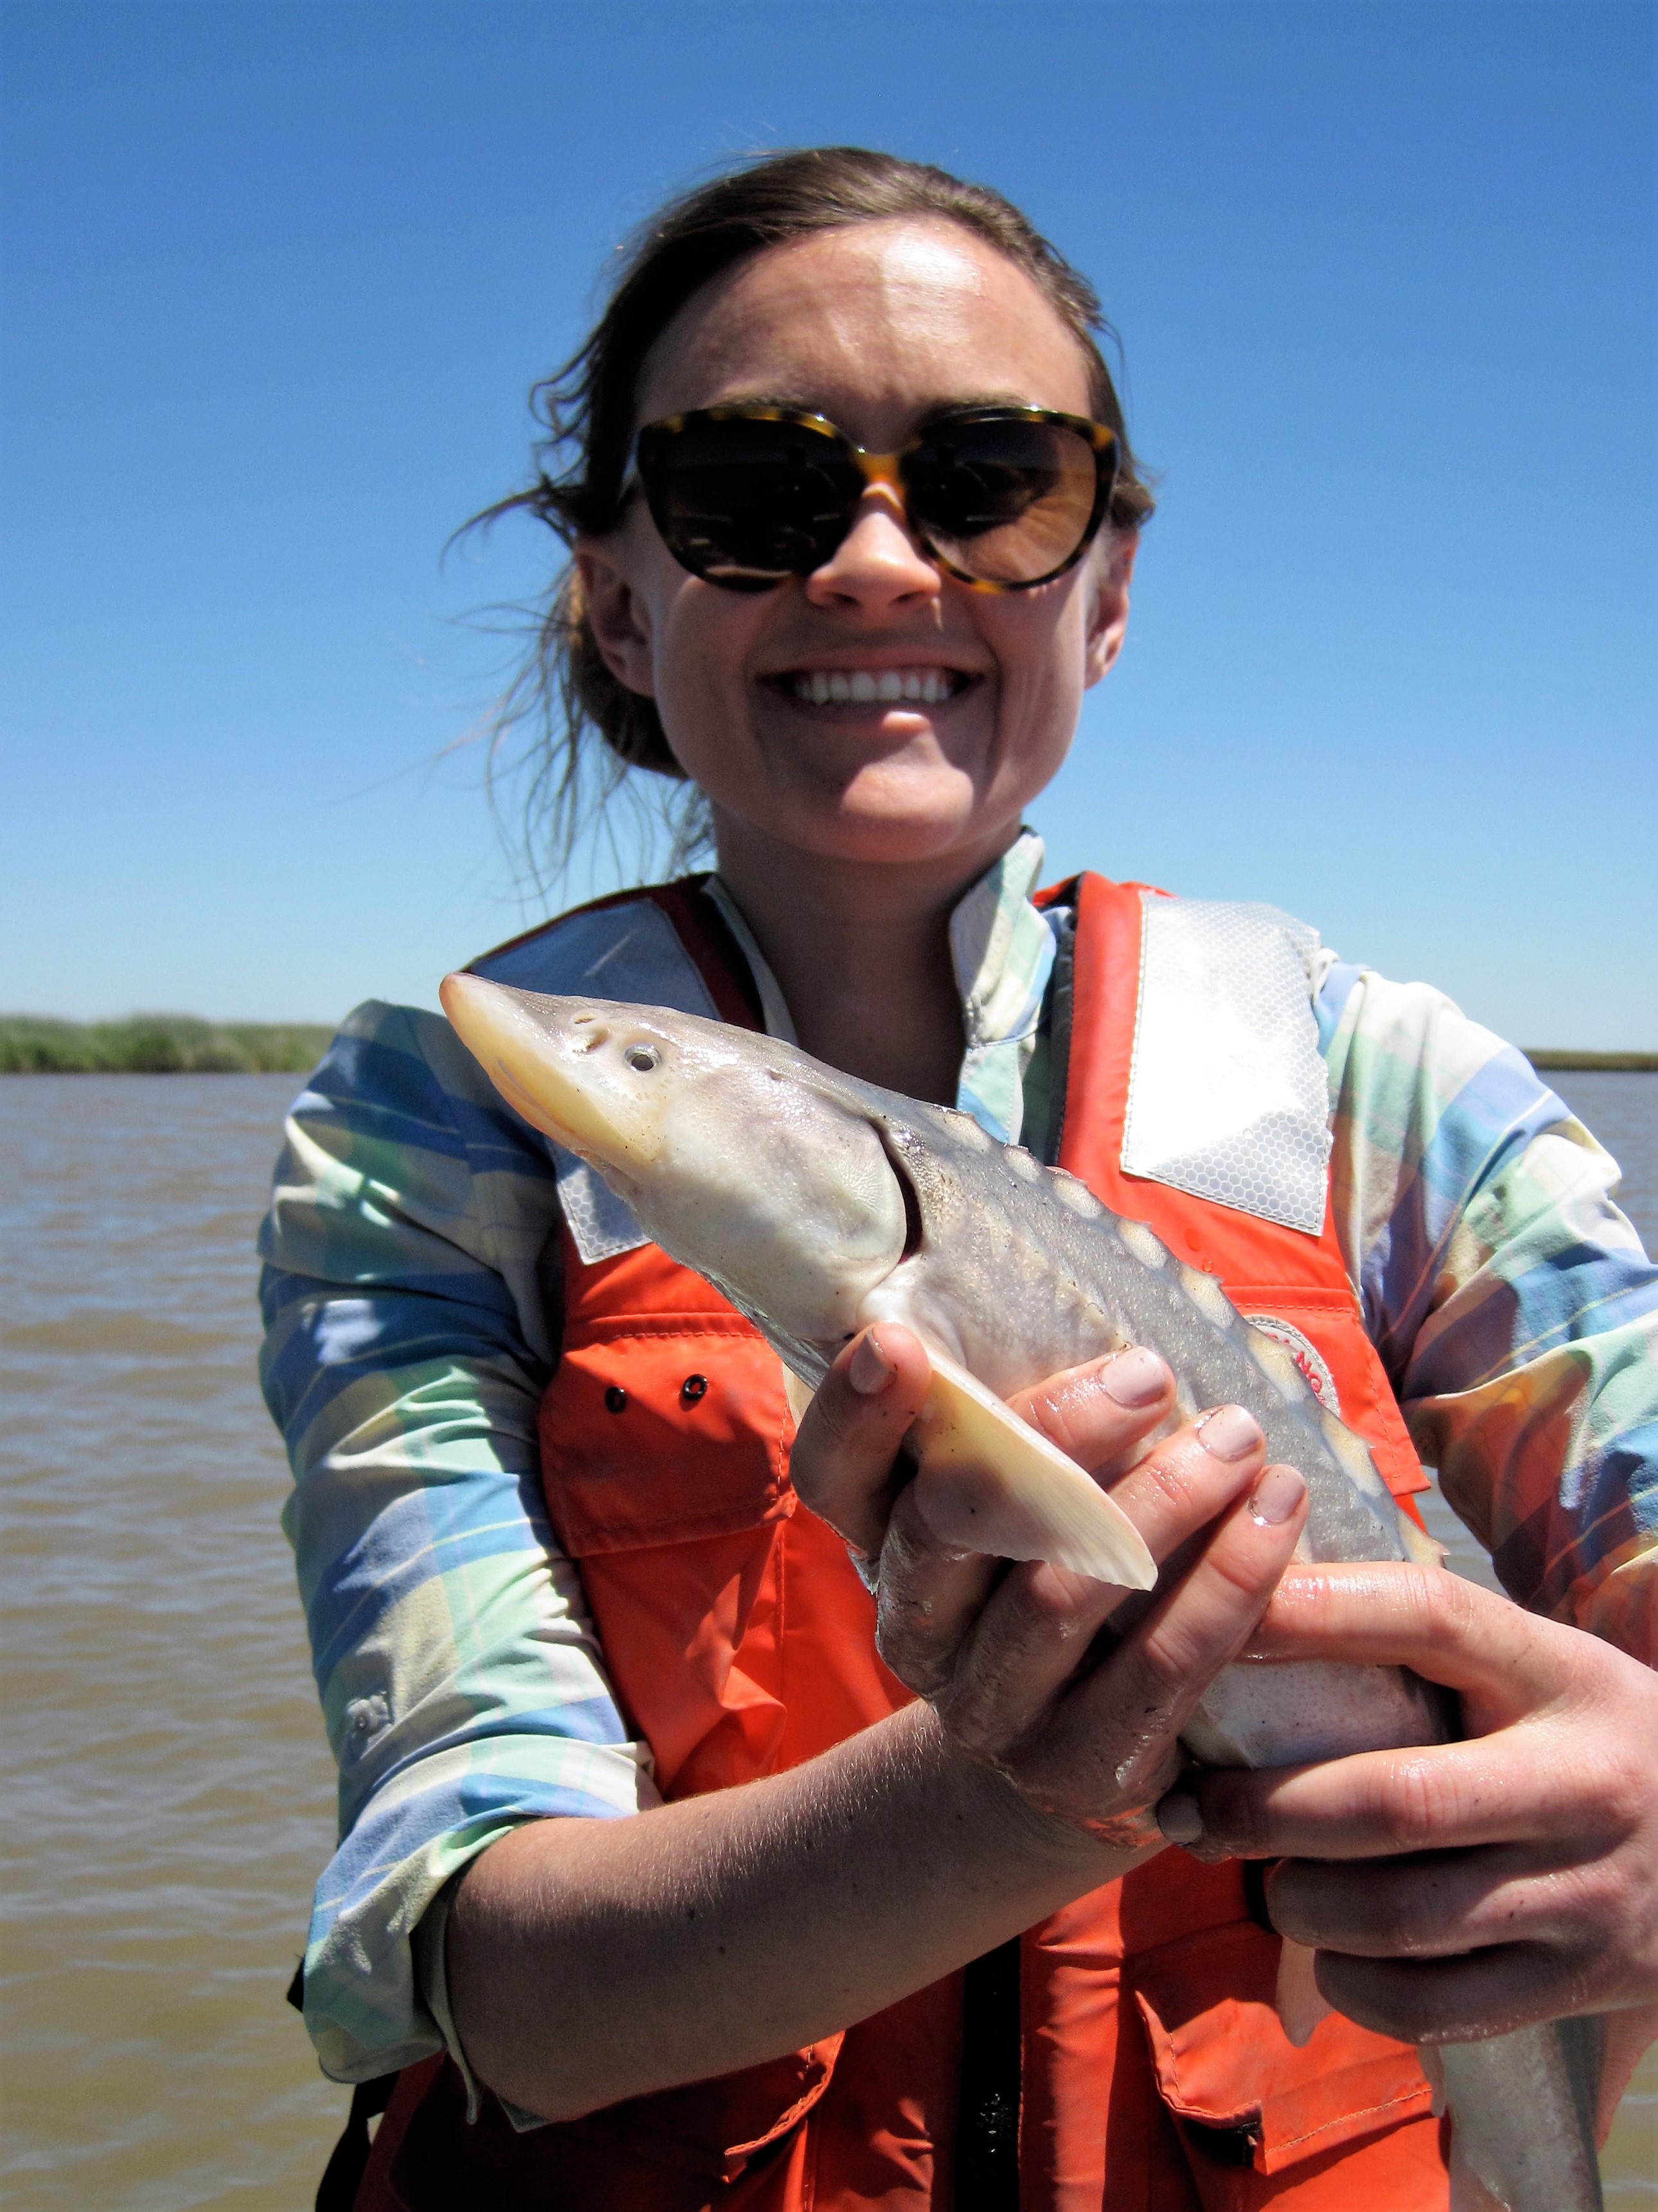 Amanda Wasserman with a juvenile white sturgeon (Acipenser transmontanus). As part of the UC Davis Suisun Marsh Fish Study, this fish was caught, identified, measured, and released back into the channel.